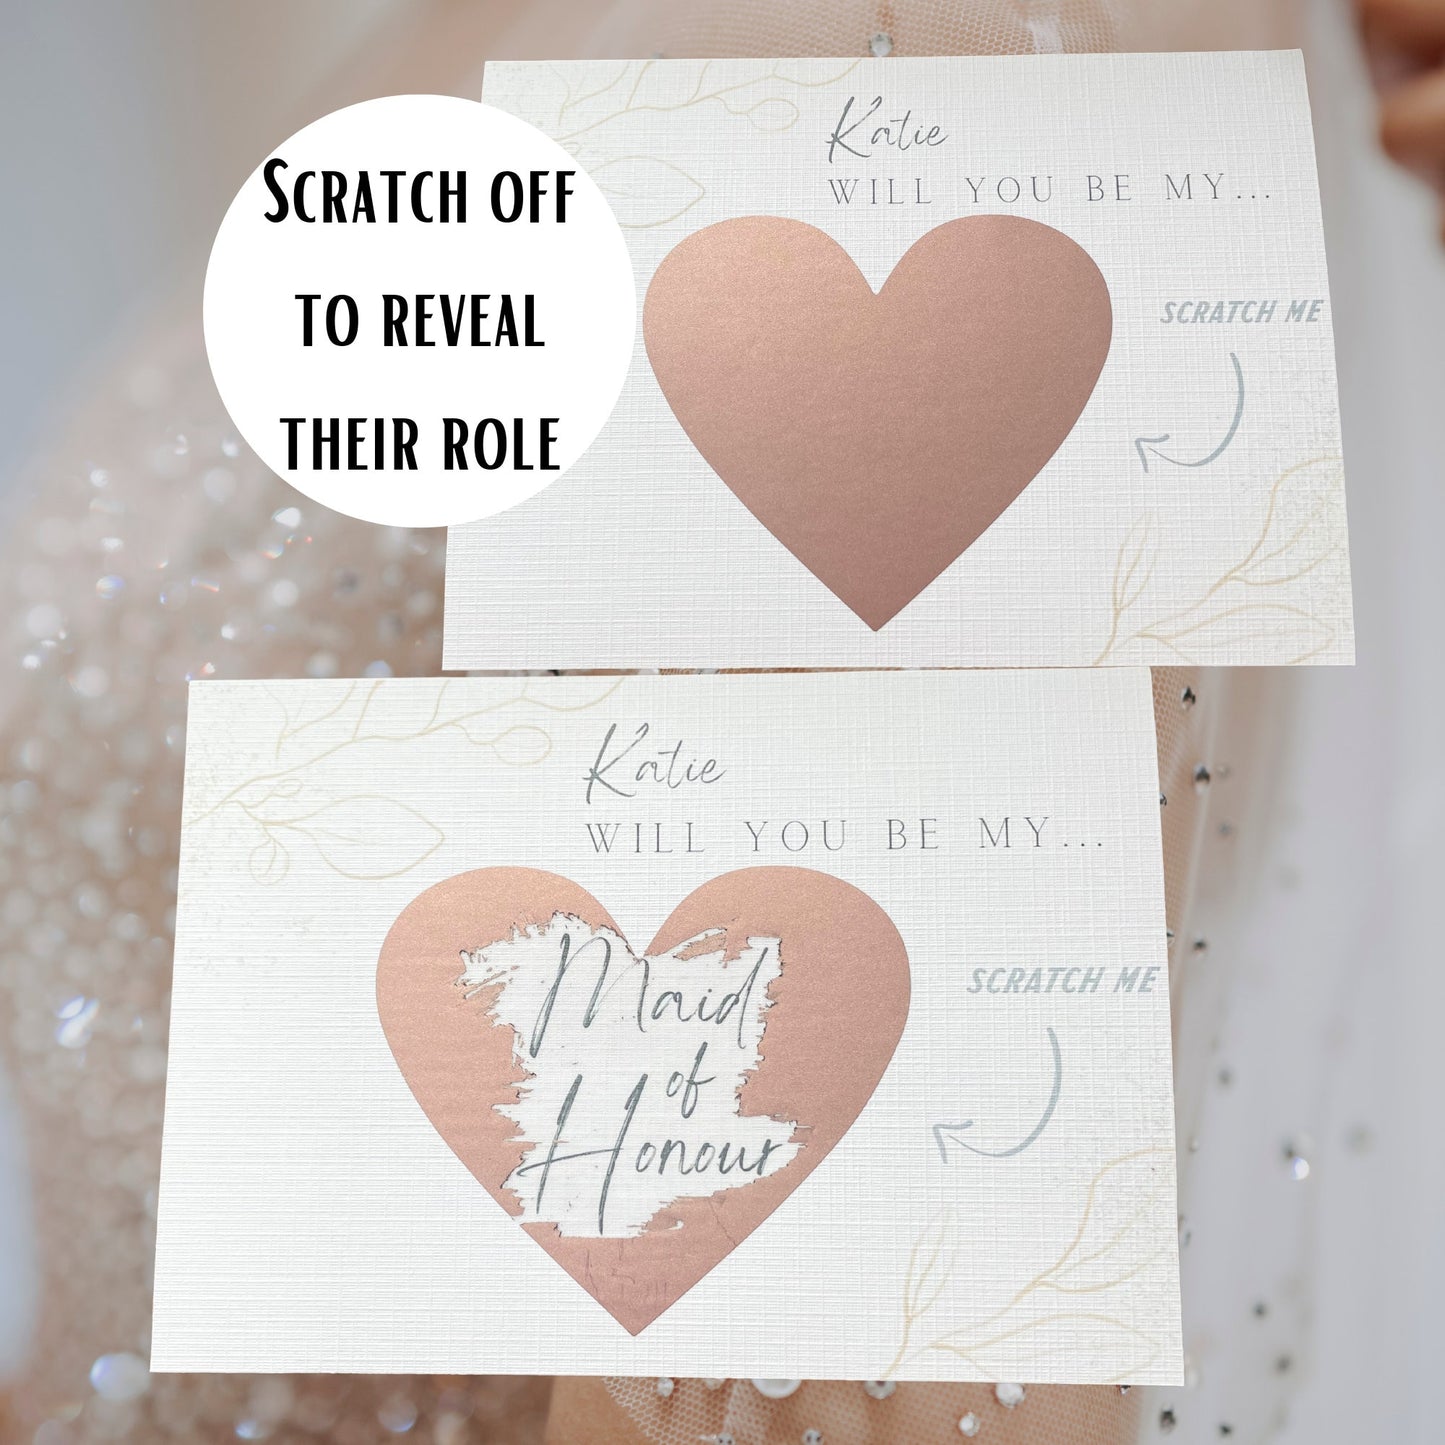 Personalised Heart-Shaped Scratch-Off Bridesmaid Proposal Cards: Nude Colour